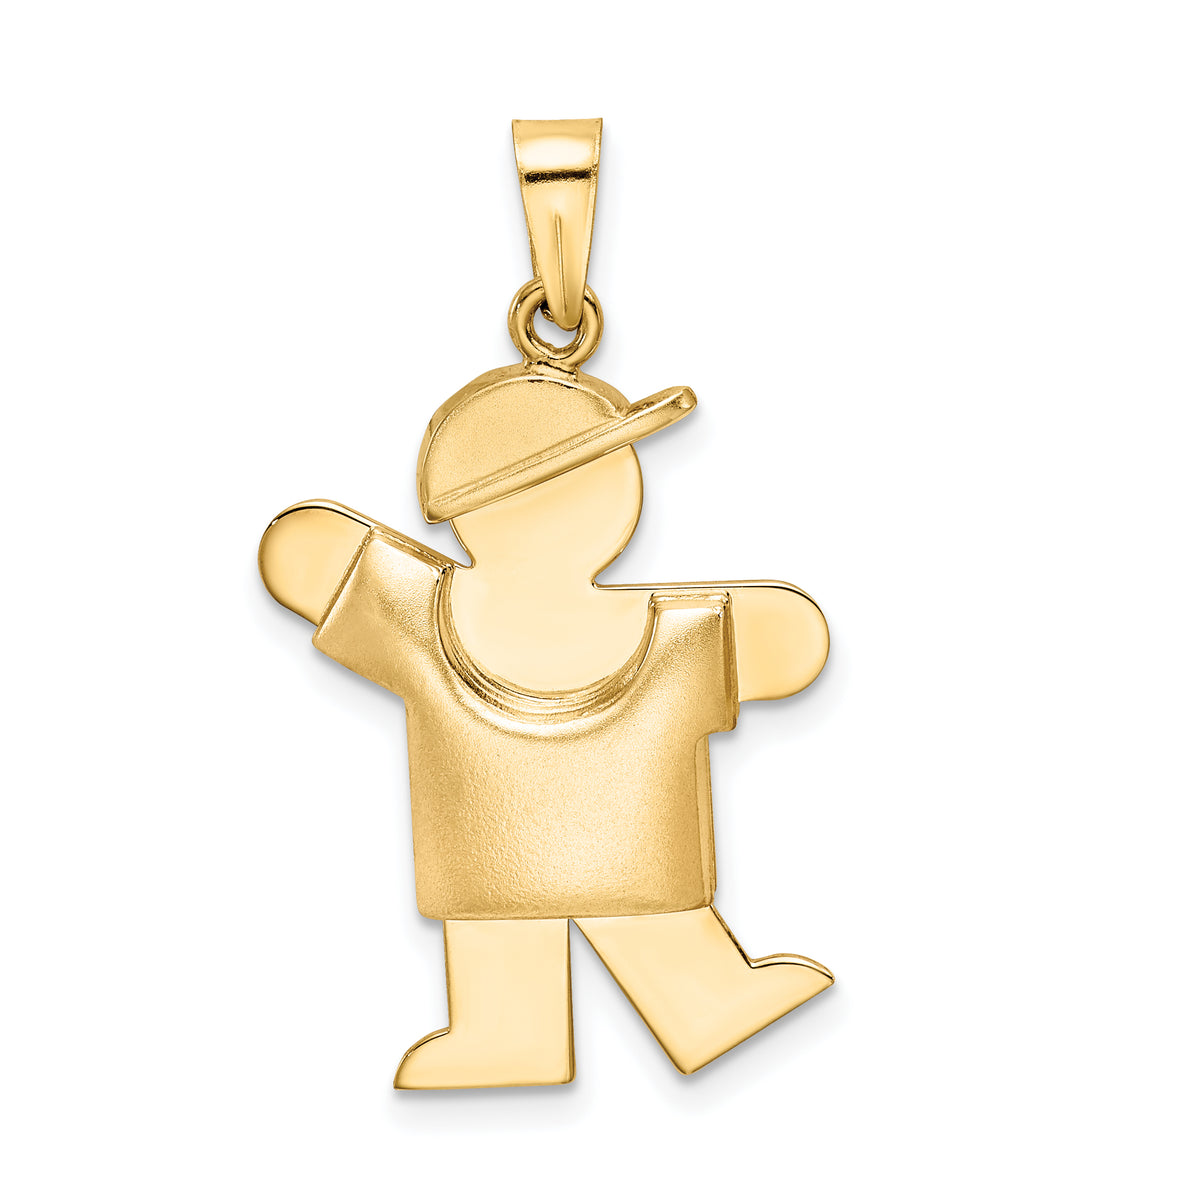 14k Puffed Boy with Hat on Left Engravable Charm